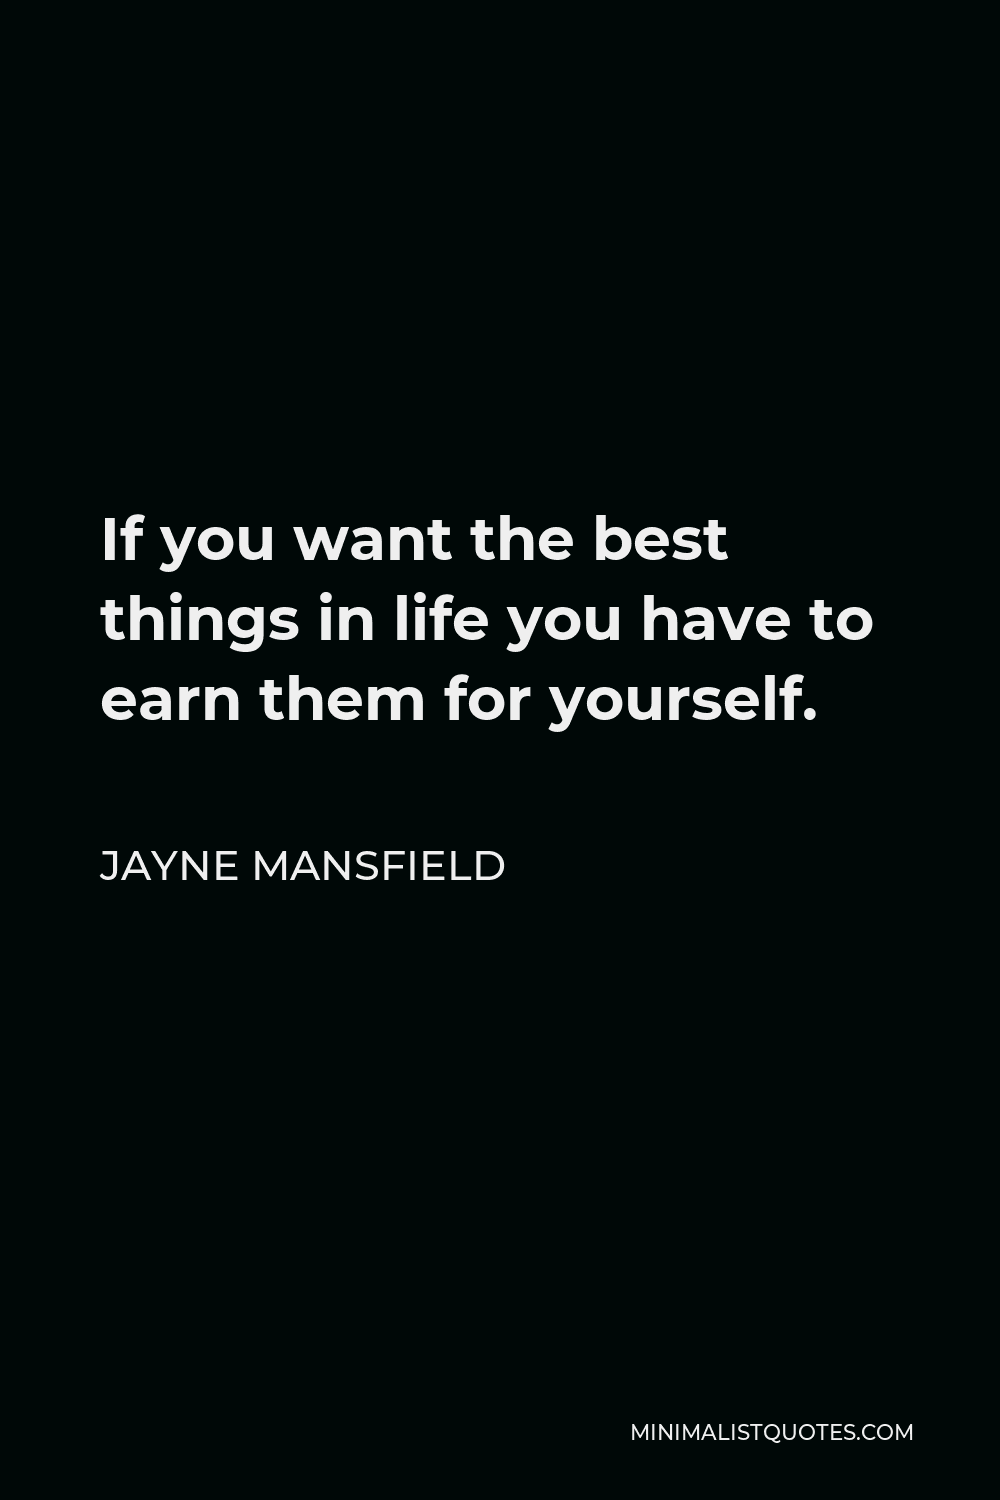 Jayne Mansfield Quote - If you want the best things in life you have to earn them for yourself.